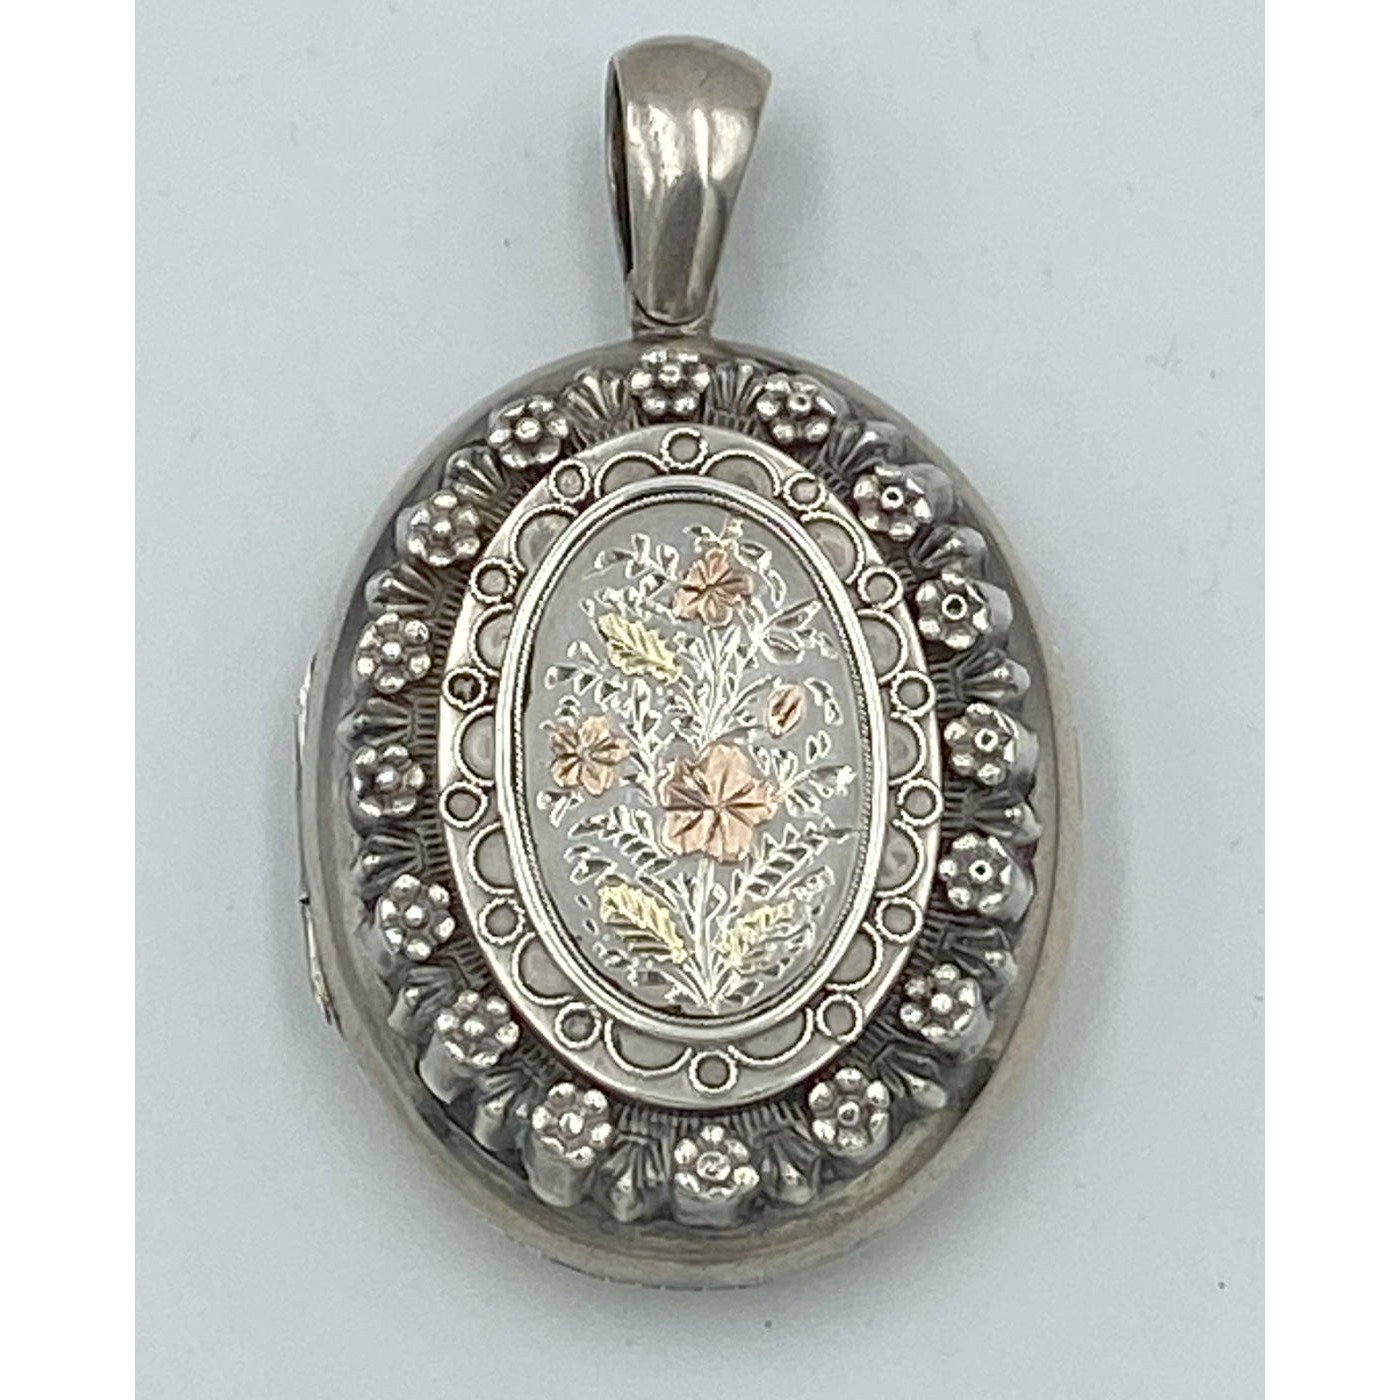 Highly Adorned Rose and Yellow Gold Applied Flowers Rosette Border Antique English Silver Locket